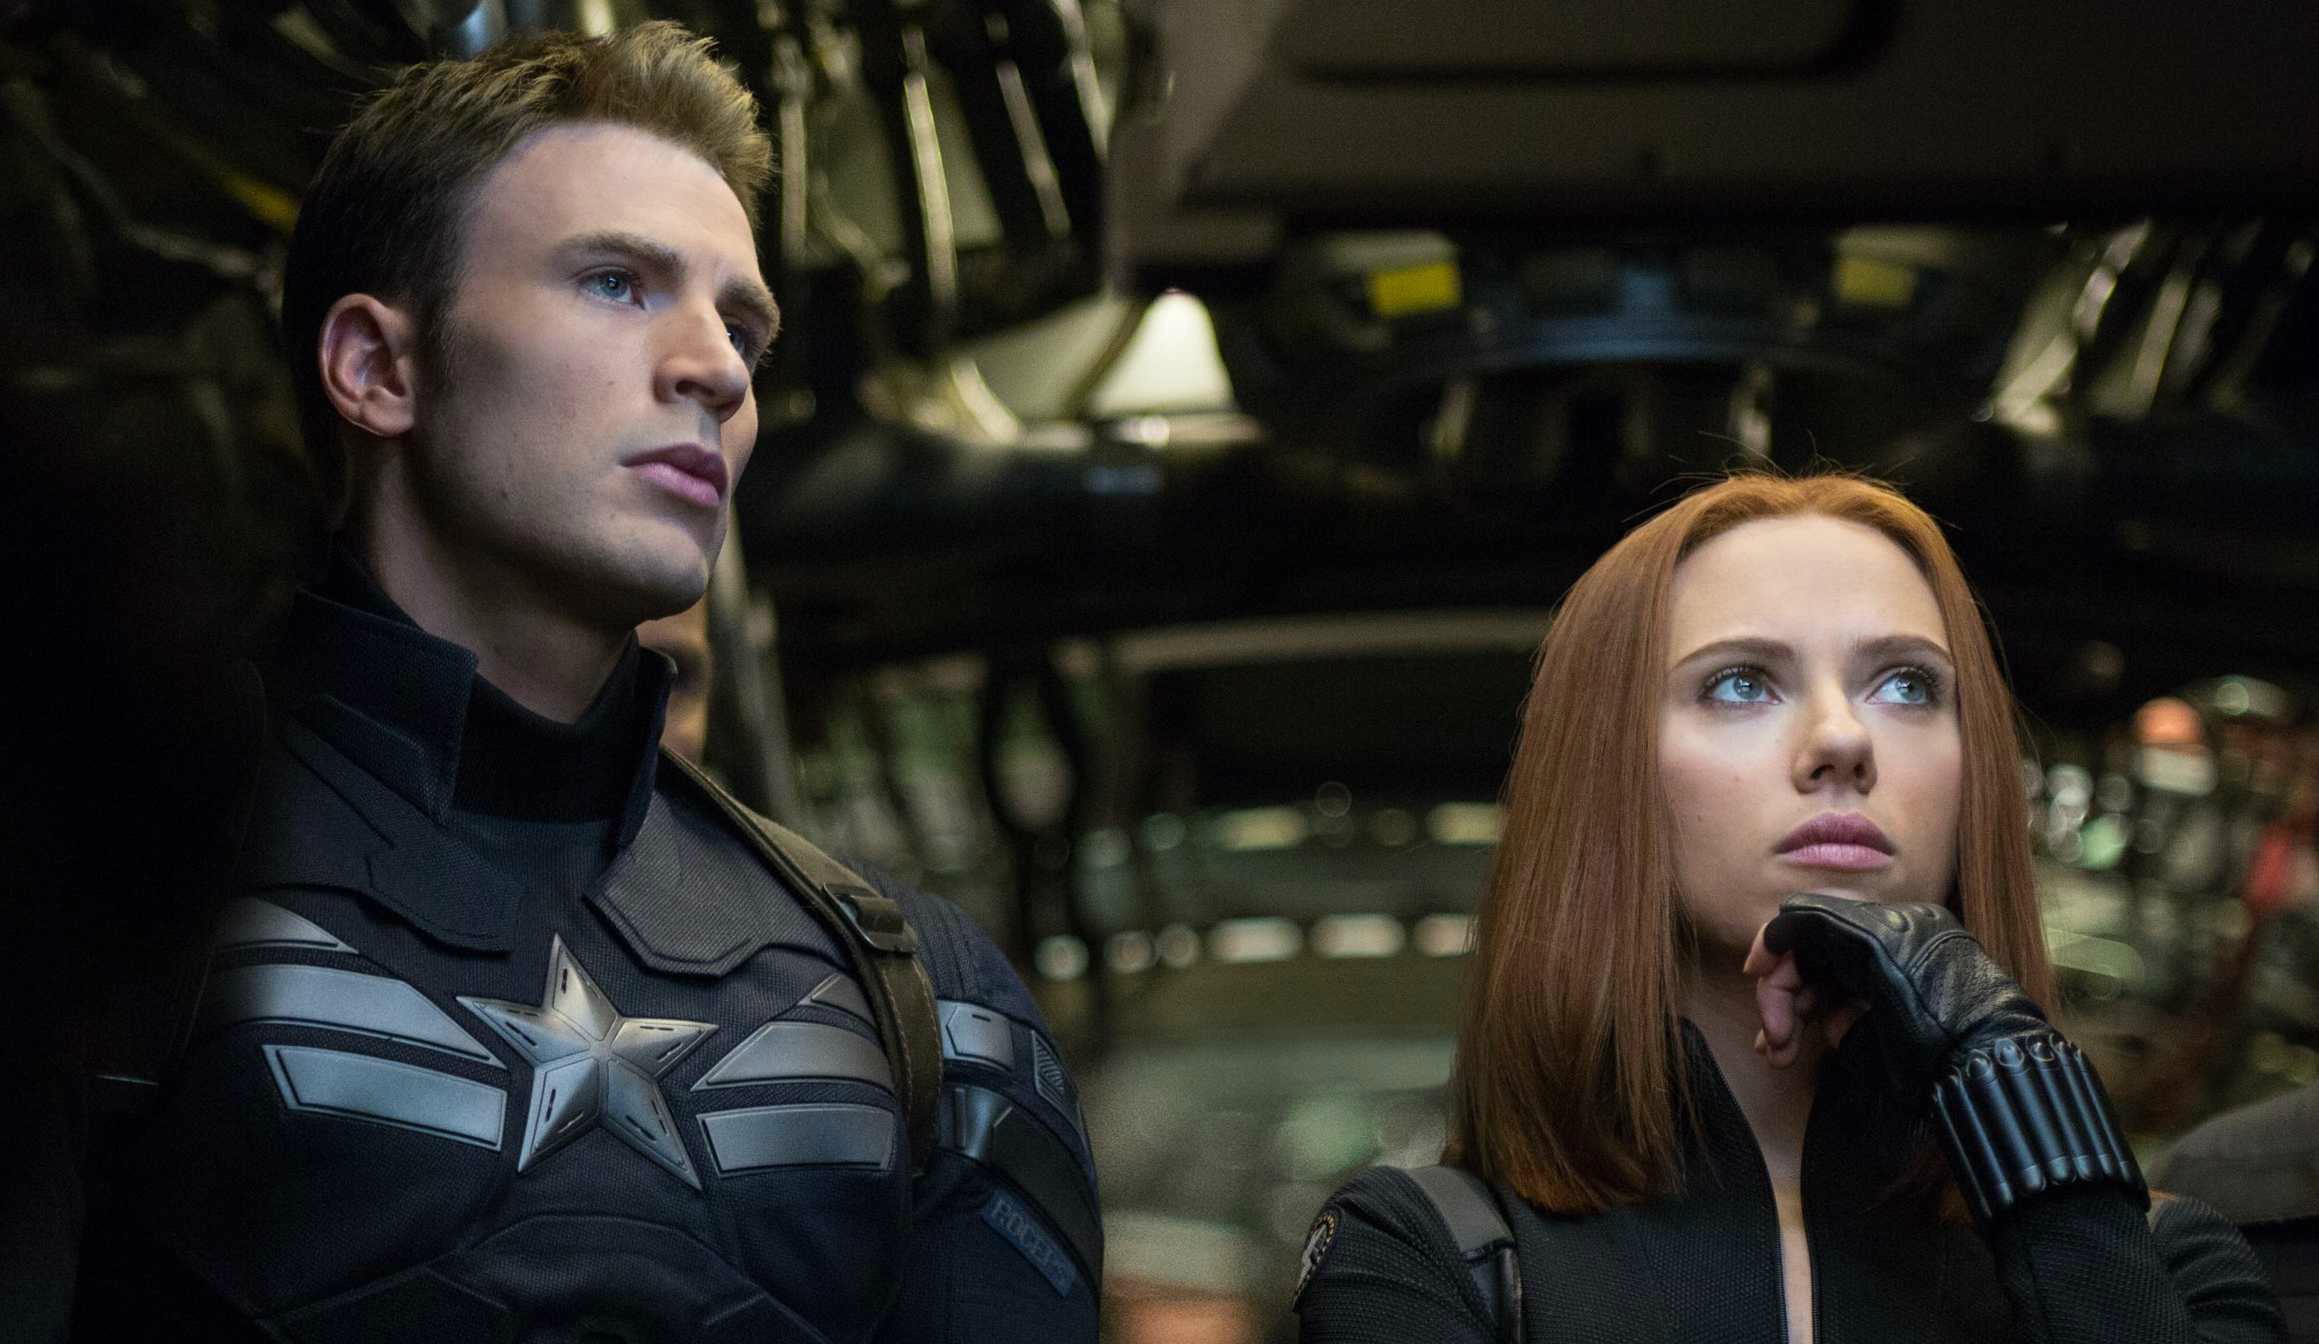 Review: ‘The Winter Soldier’ Satisfies With Spy Thrills and Super Heroics